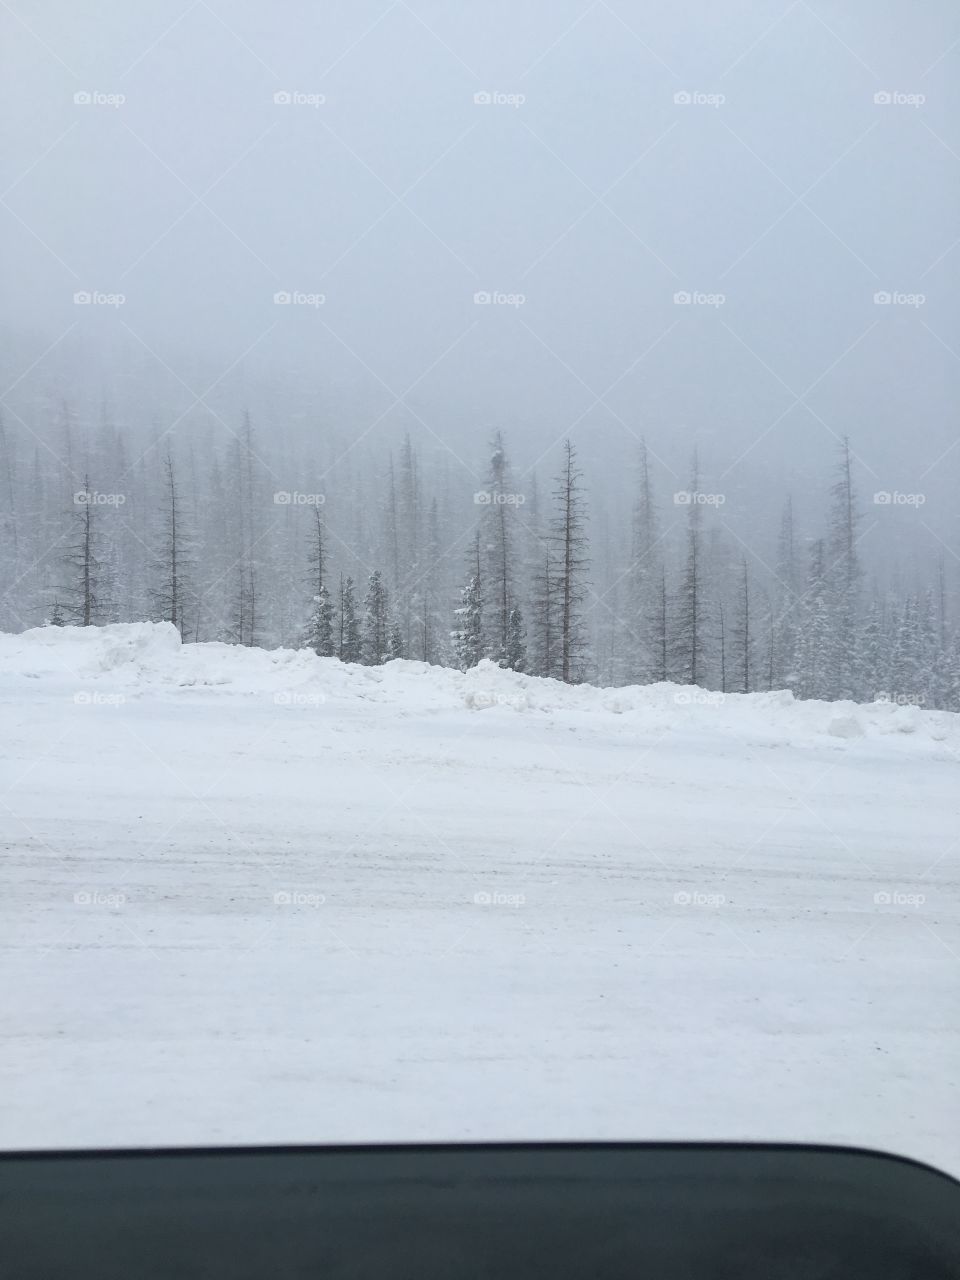 snow covering the ground in Colorado